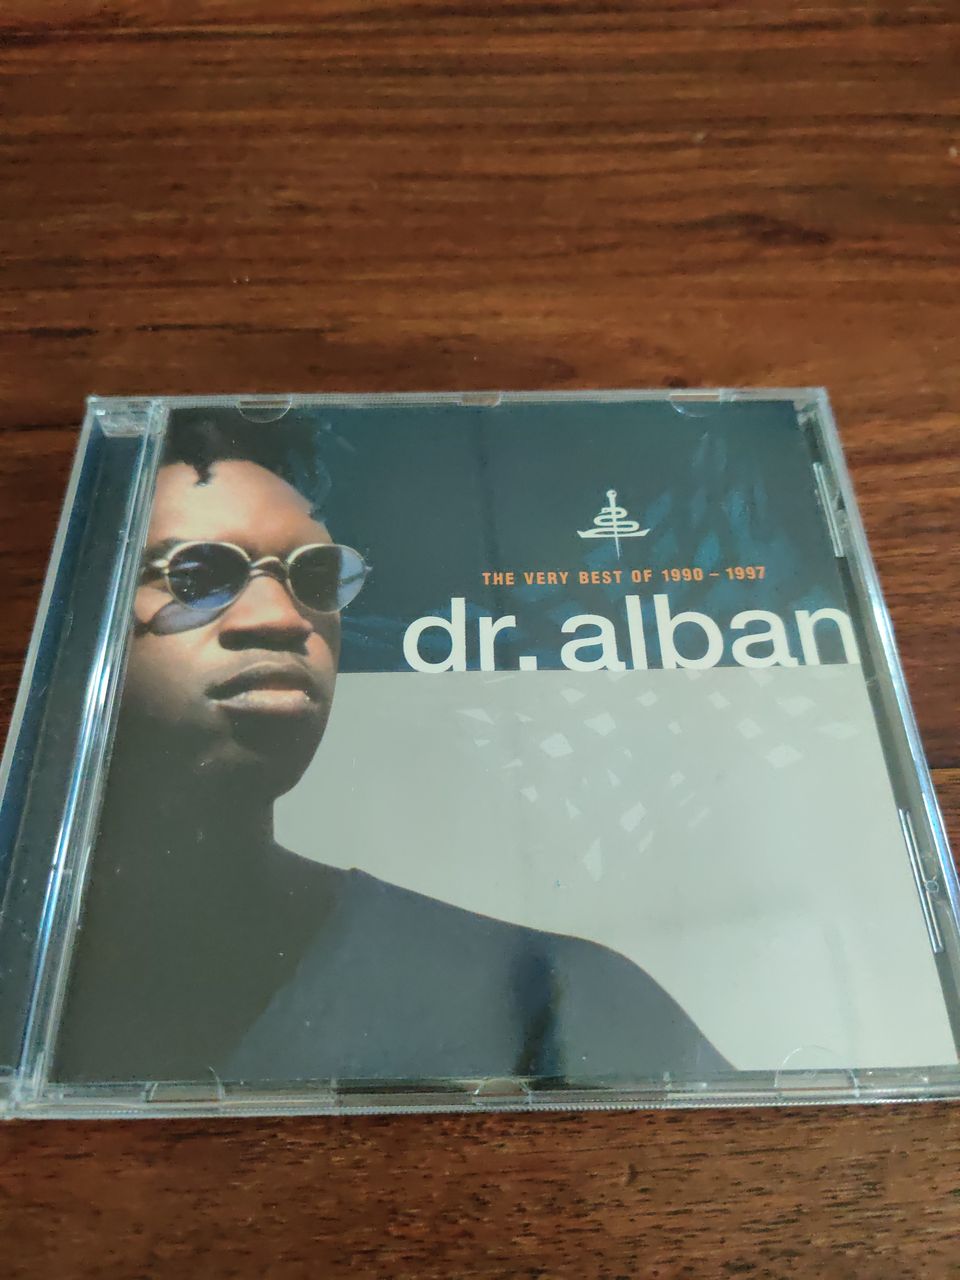 Dr. Alban - The Very Best of 1990-1997